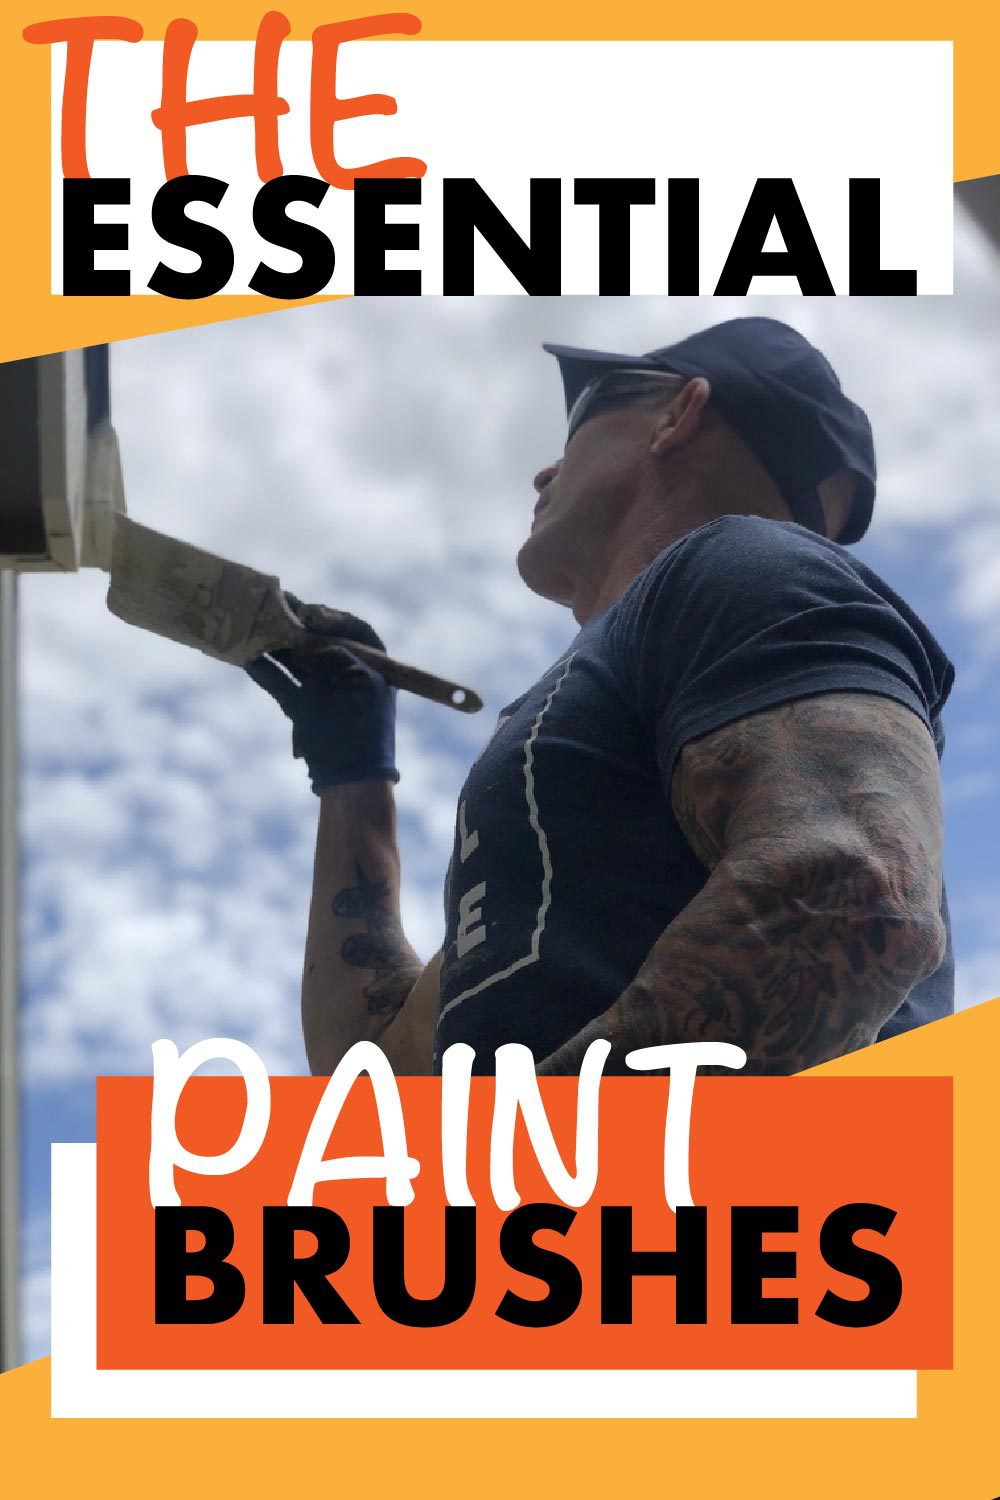 What paint brushes should a professional painter use?